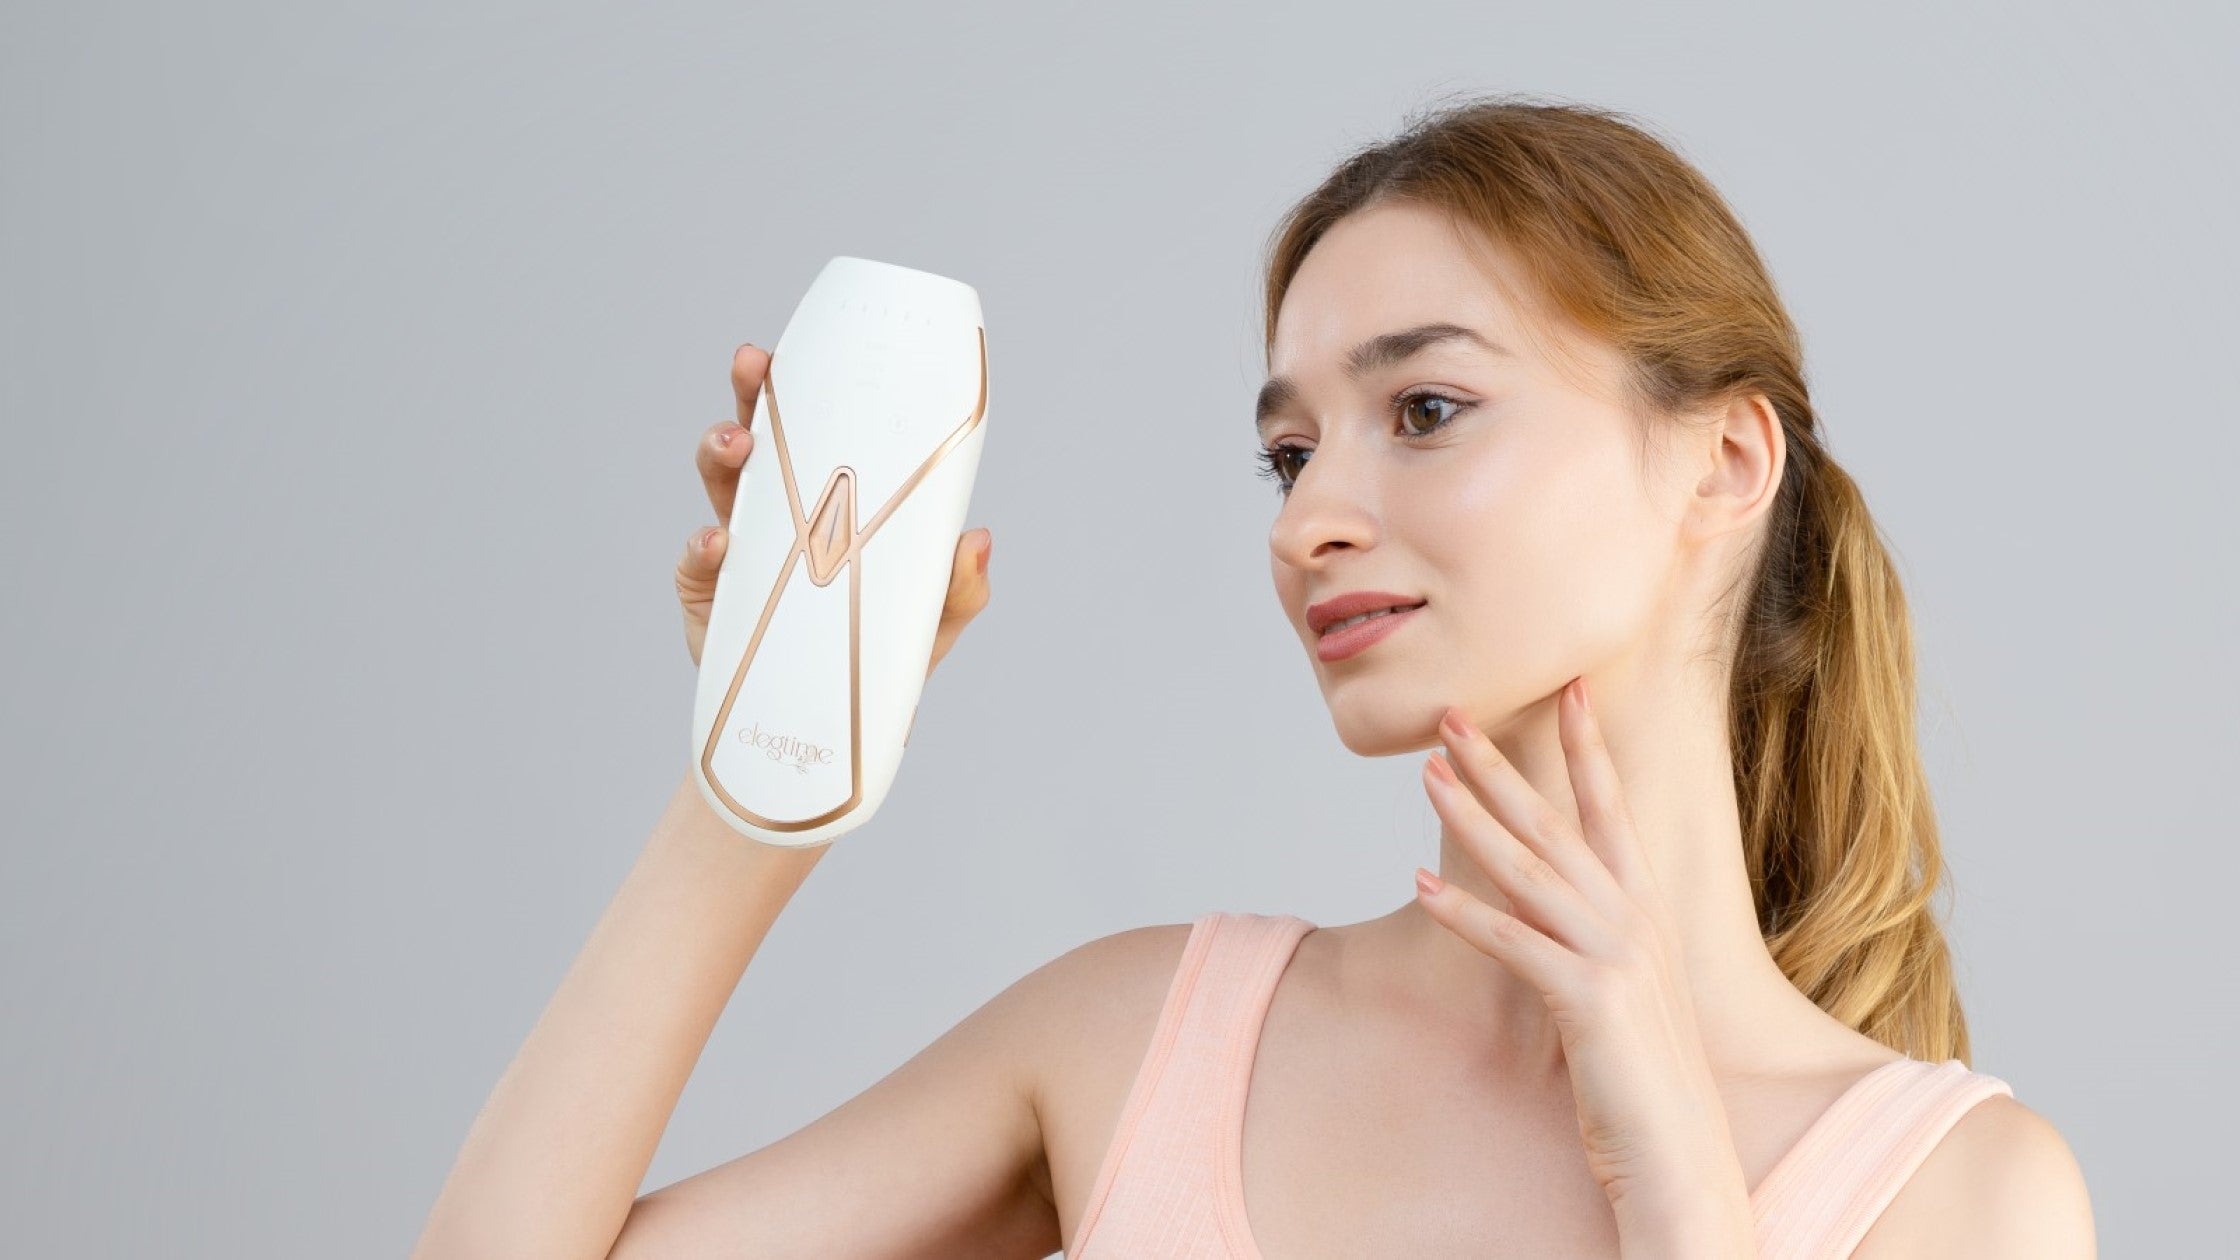 No More Fuss: 5-Minute Hair Removal Methods for Busy People